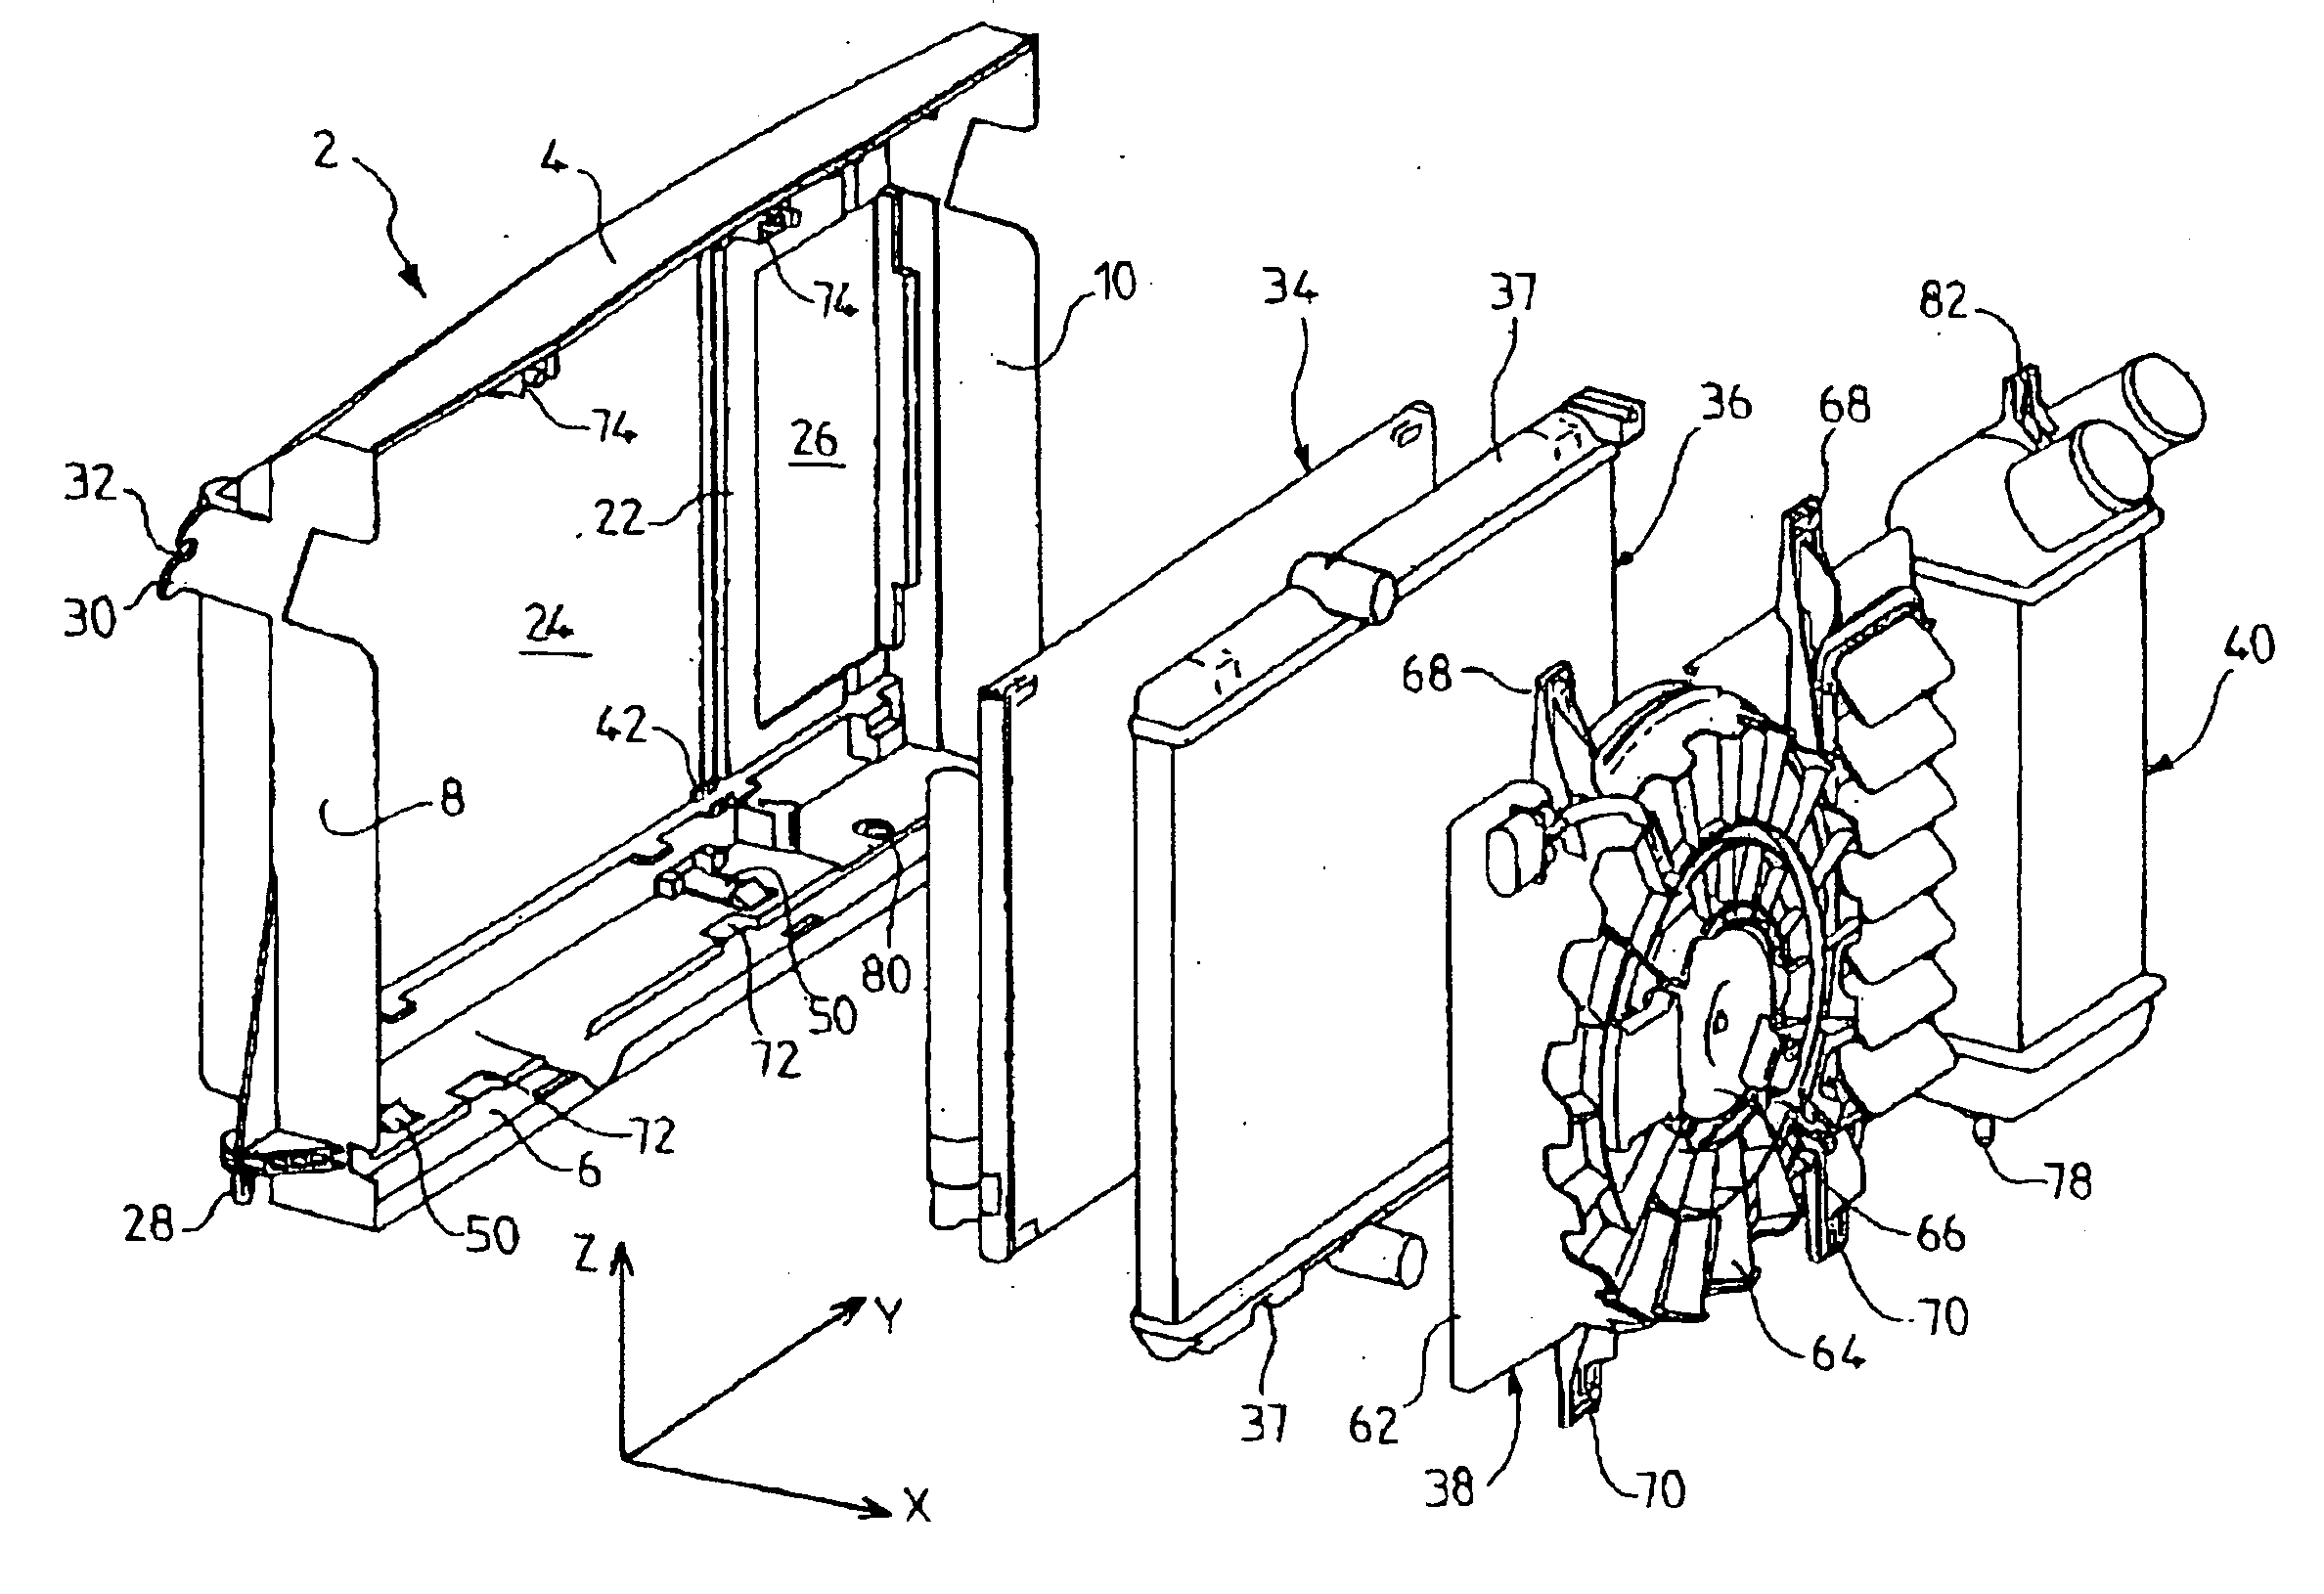 Heat exchanger support system and associated heat exchanger module